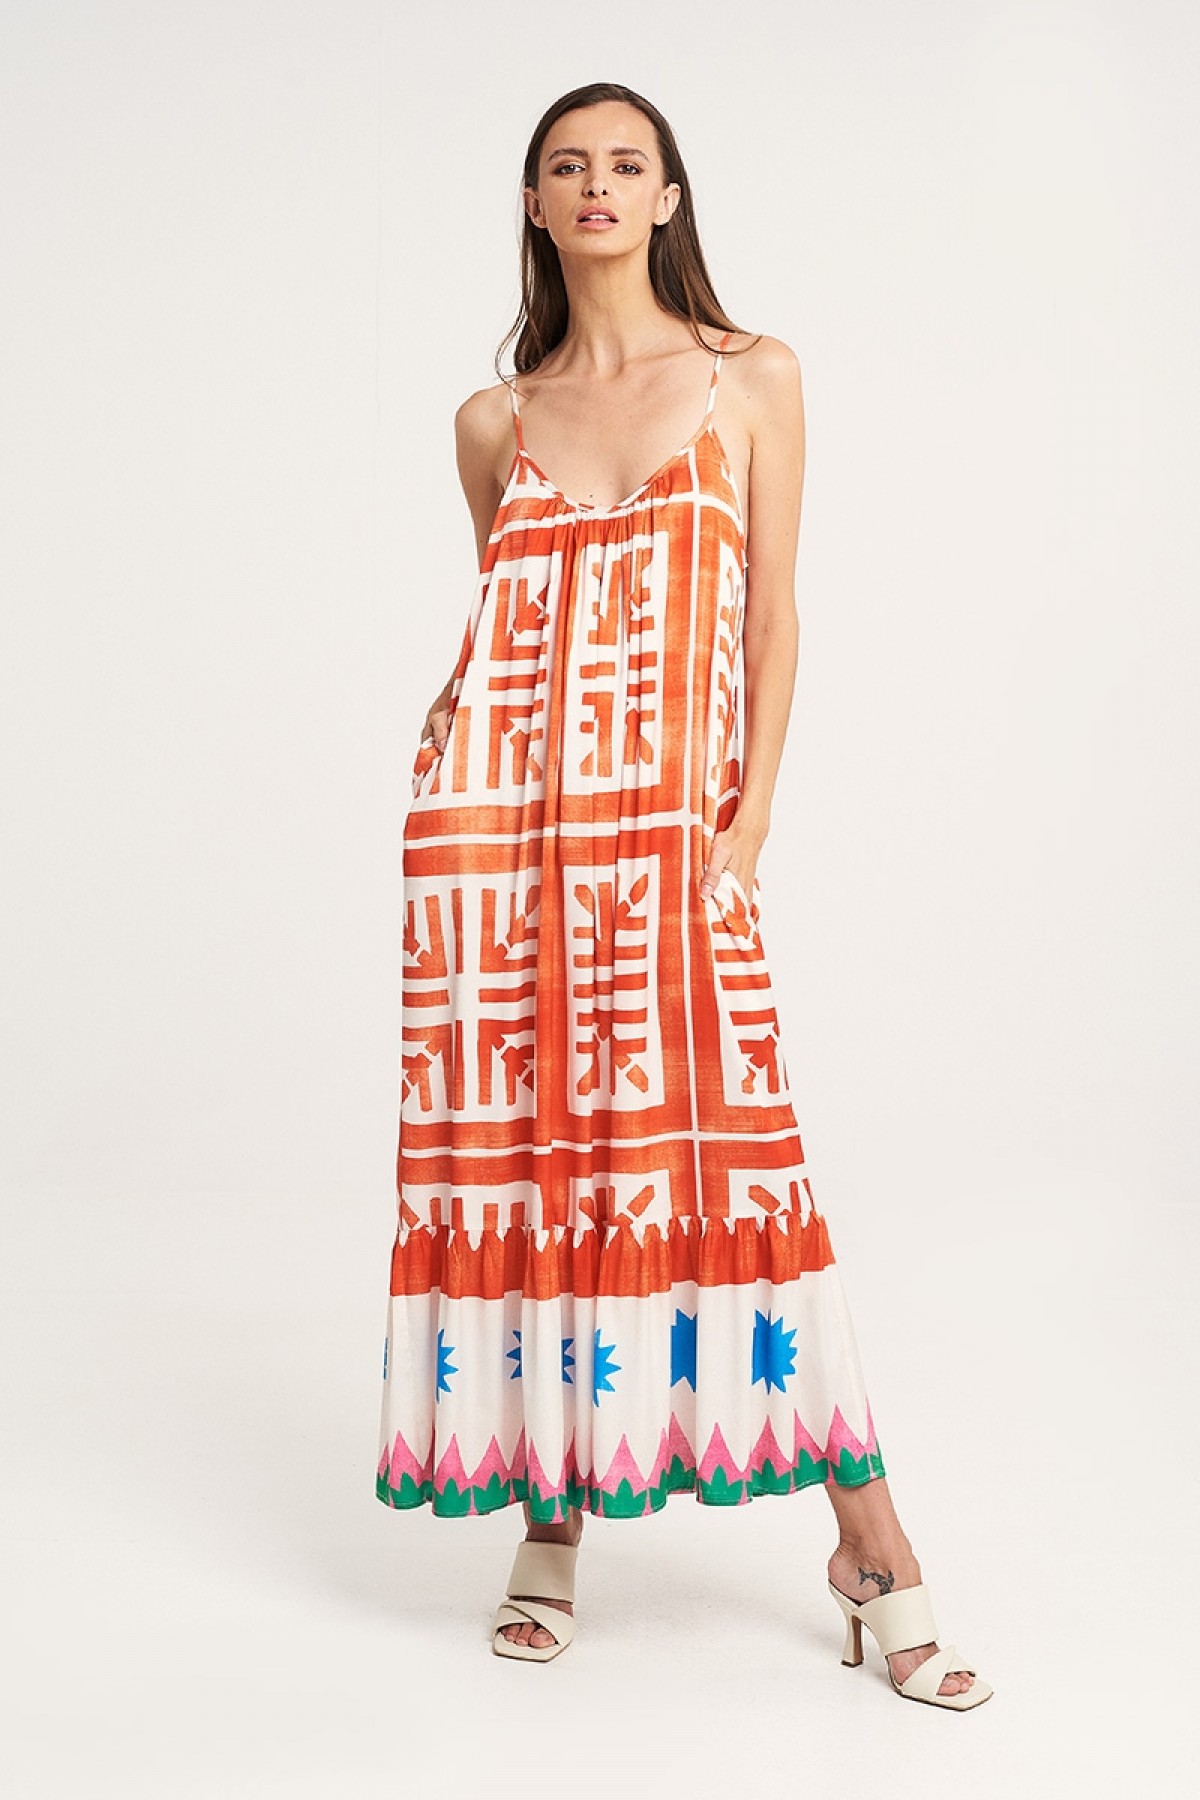 HOUSE OF ANGELS LONG PRINTED STRAP DRESS